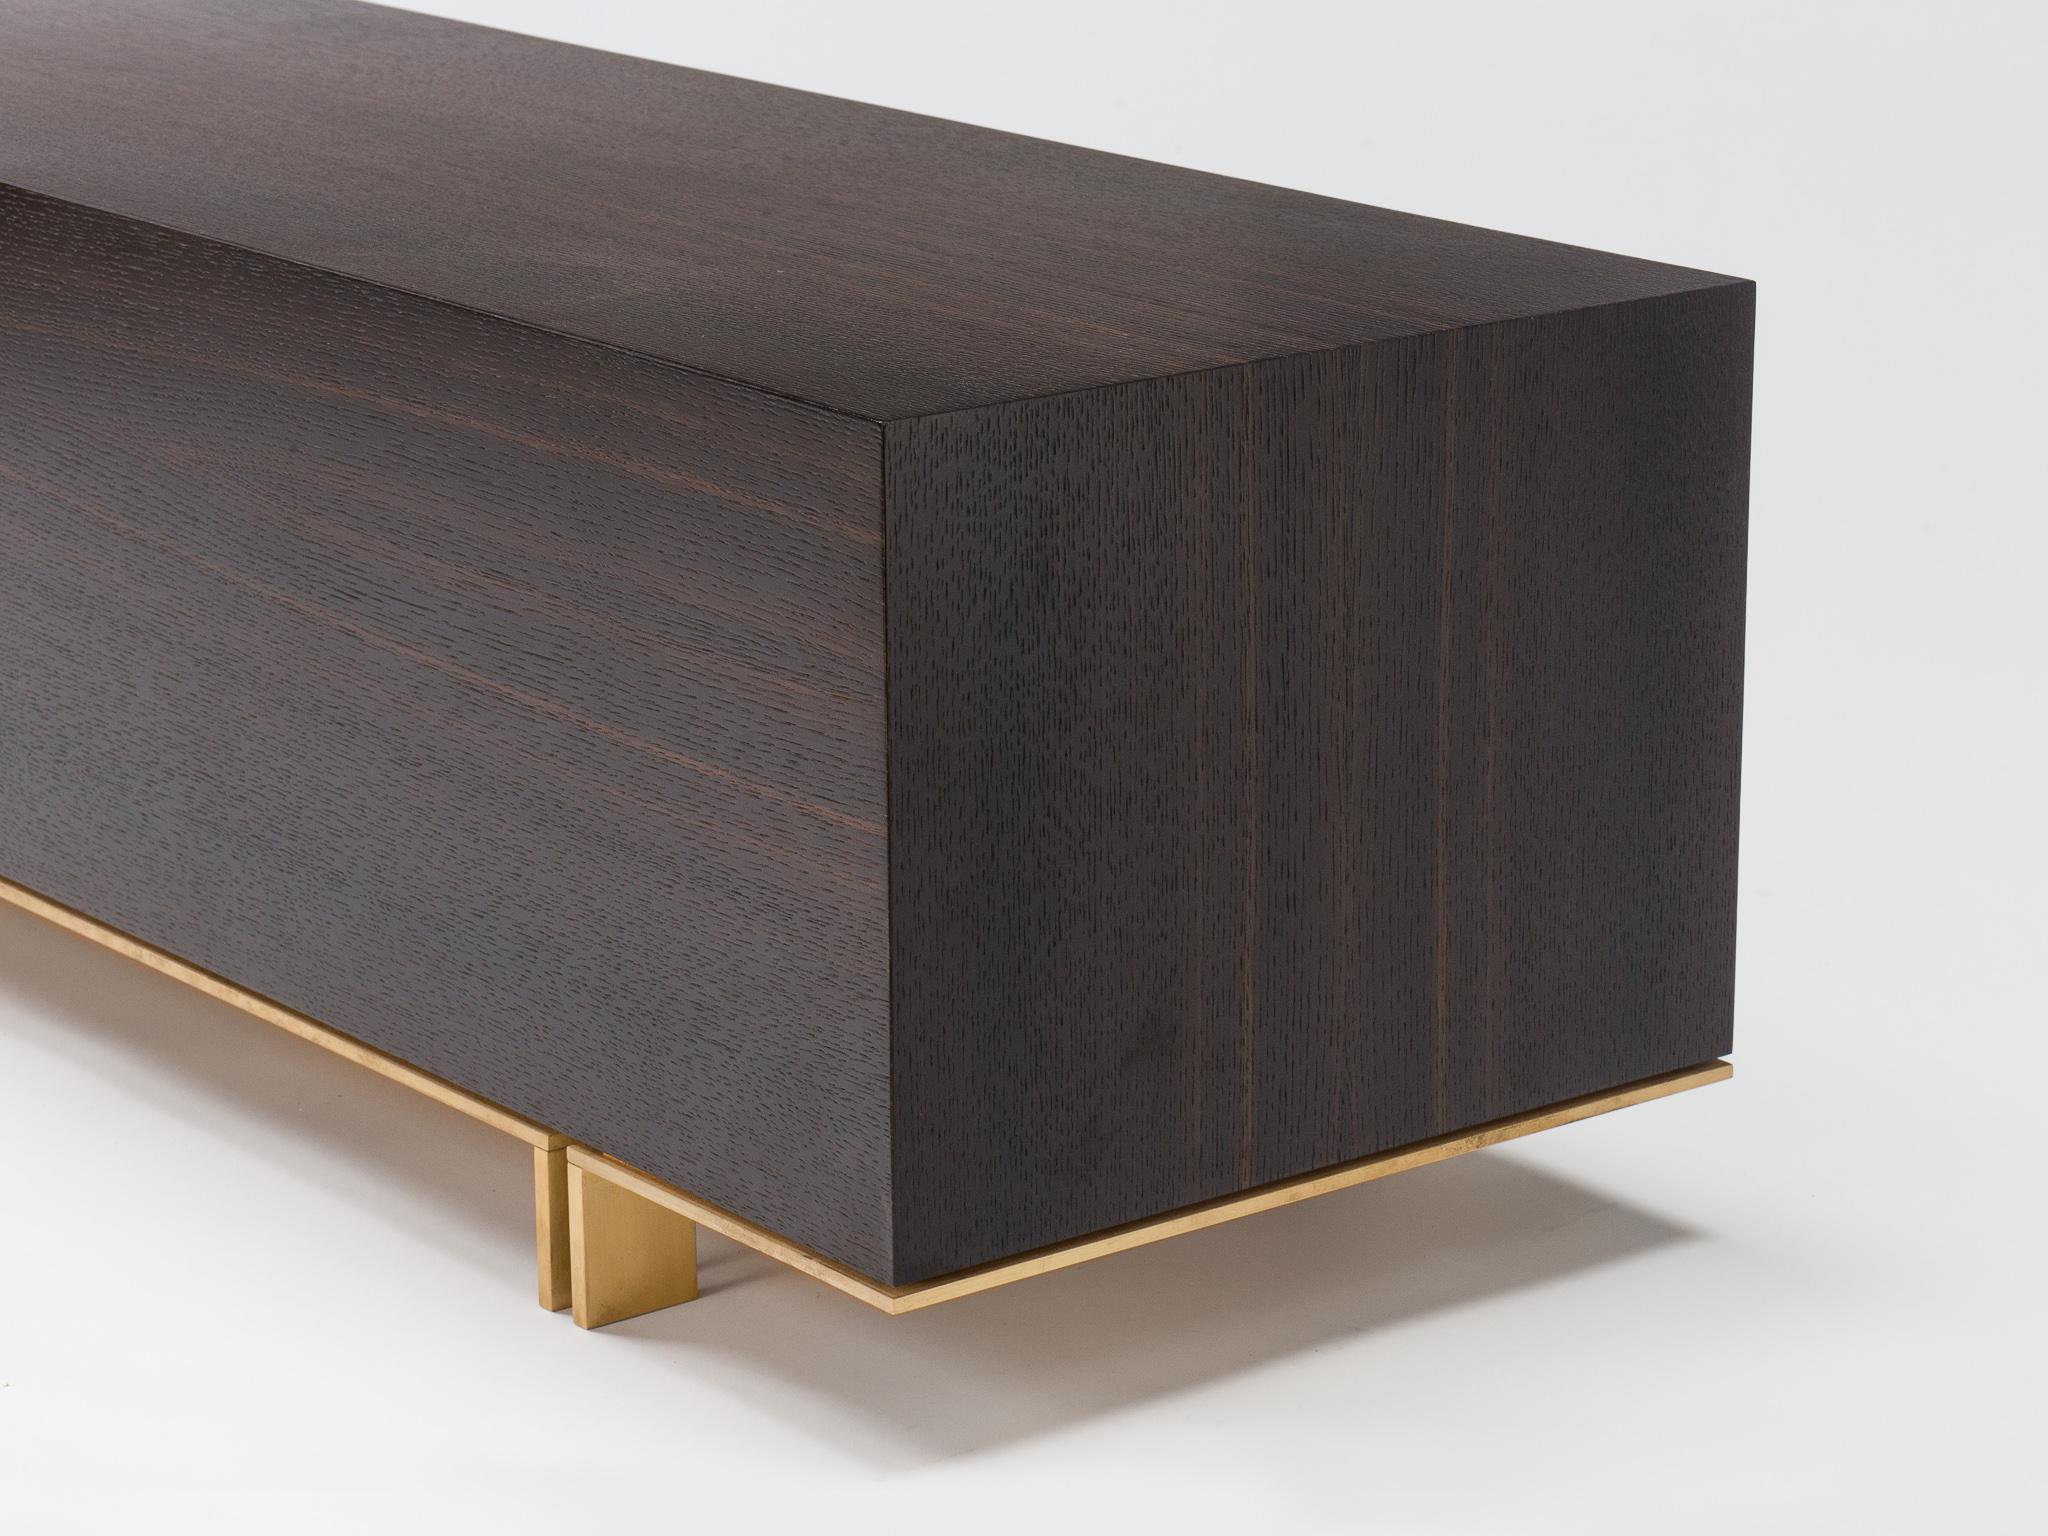 This version of our modern wood coffee table is called the 